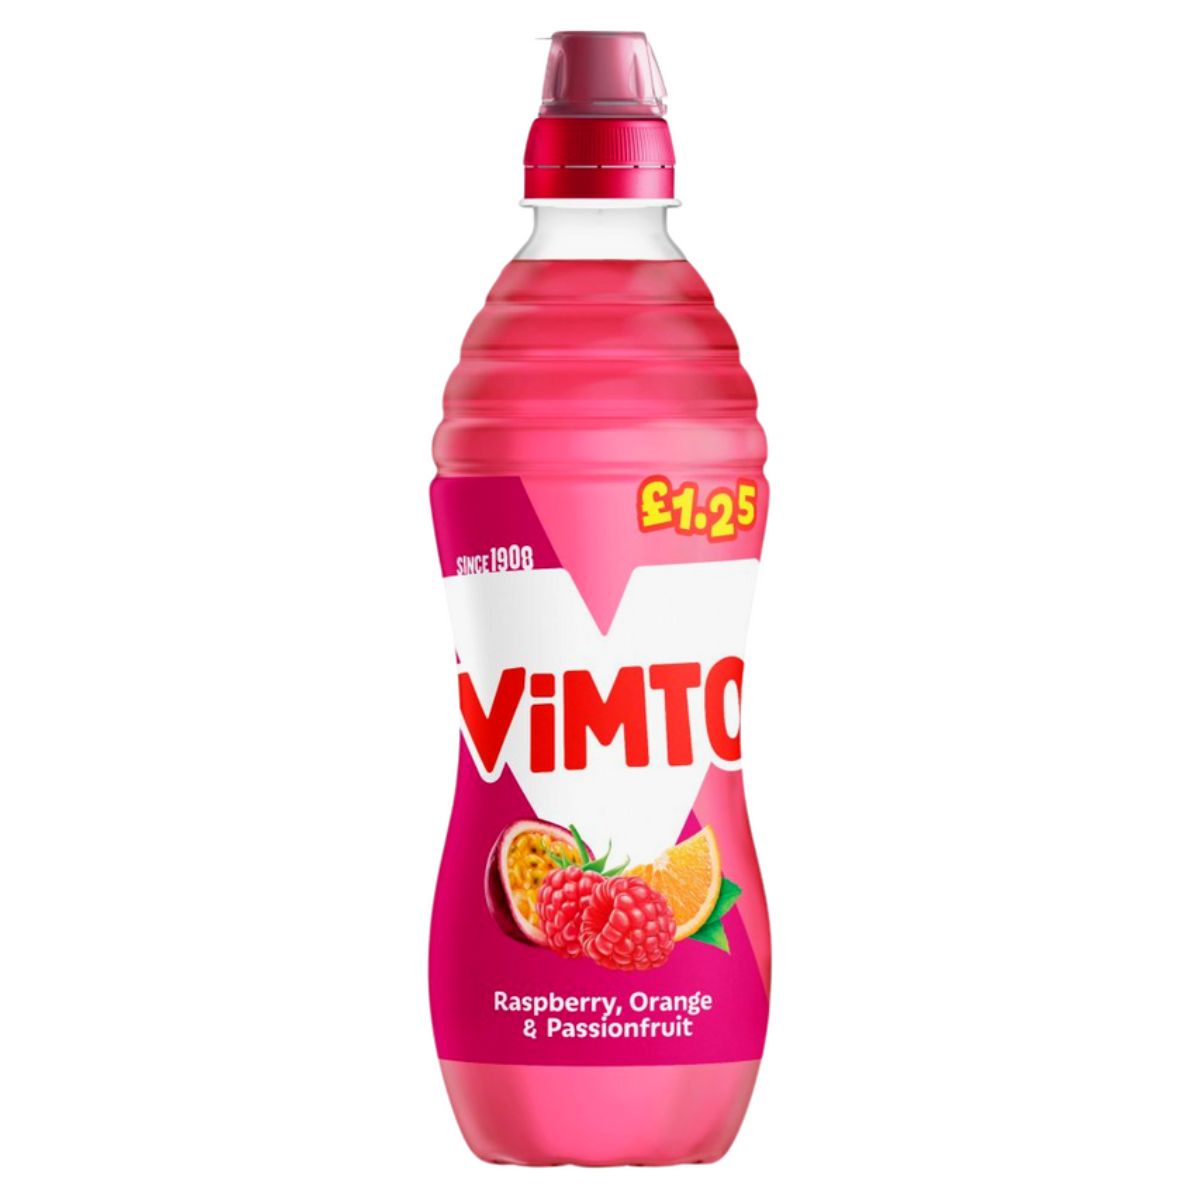 A bottle of Vimto - Orange Raspberry and Passion Fruit - 500ml with a pink label.